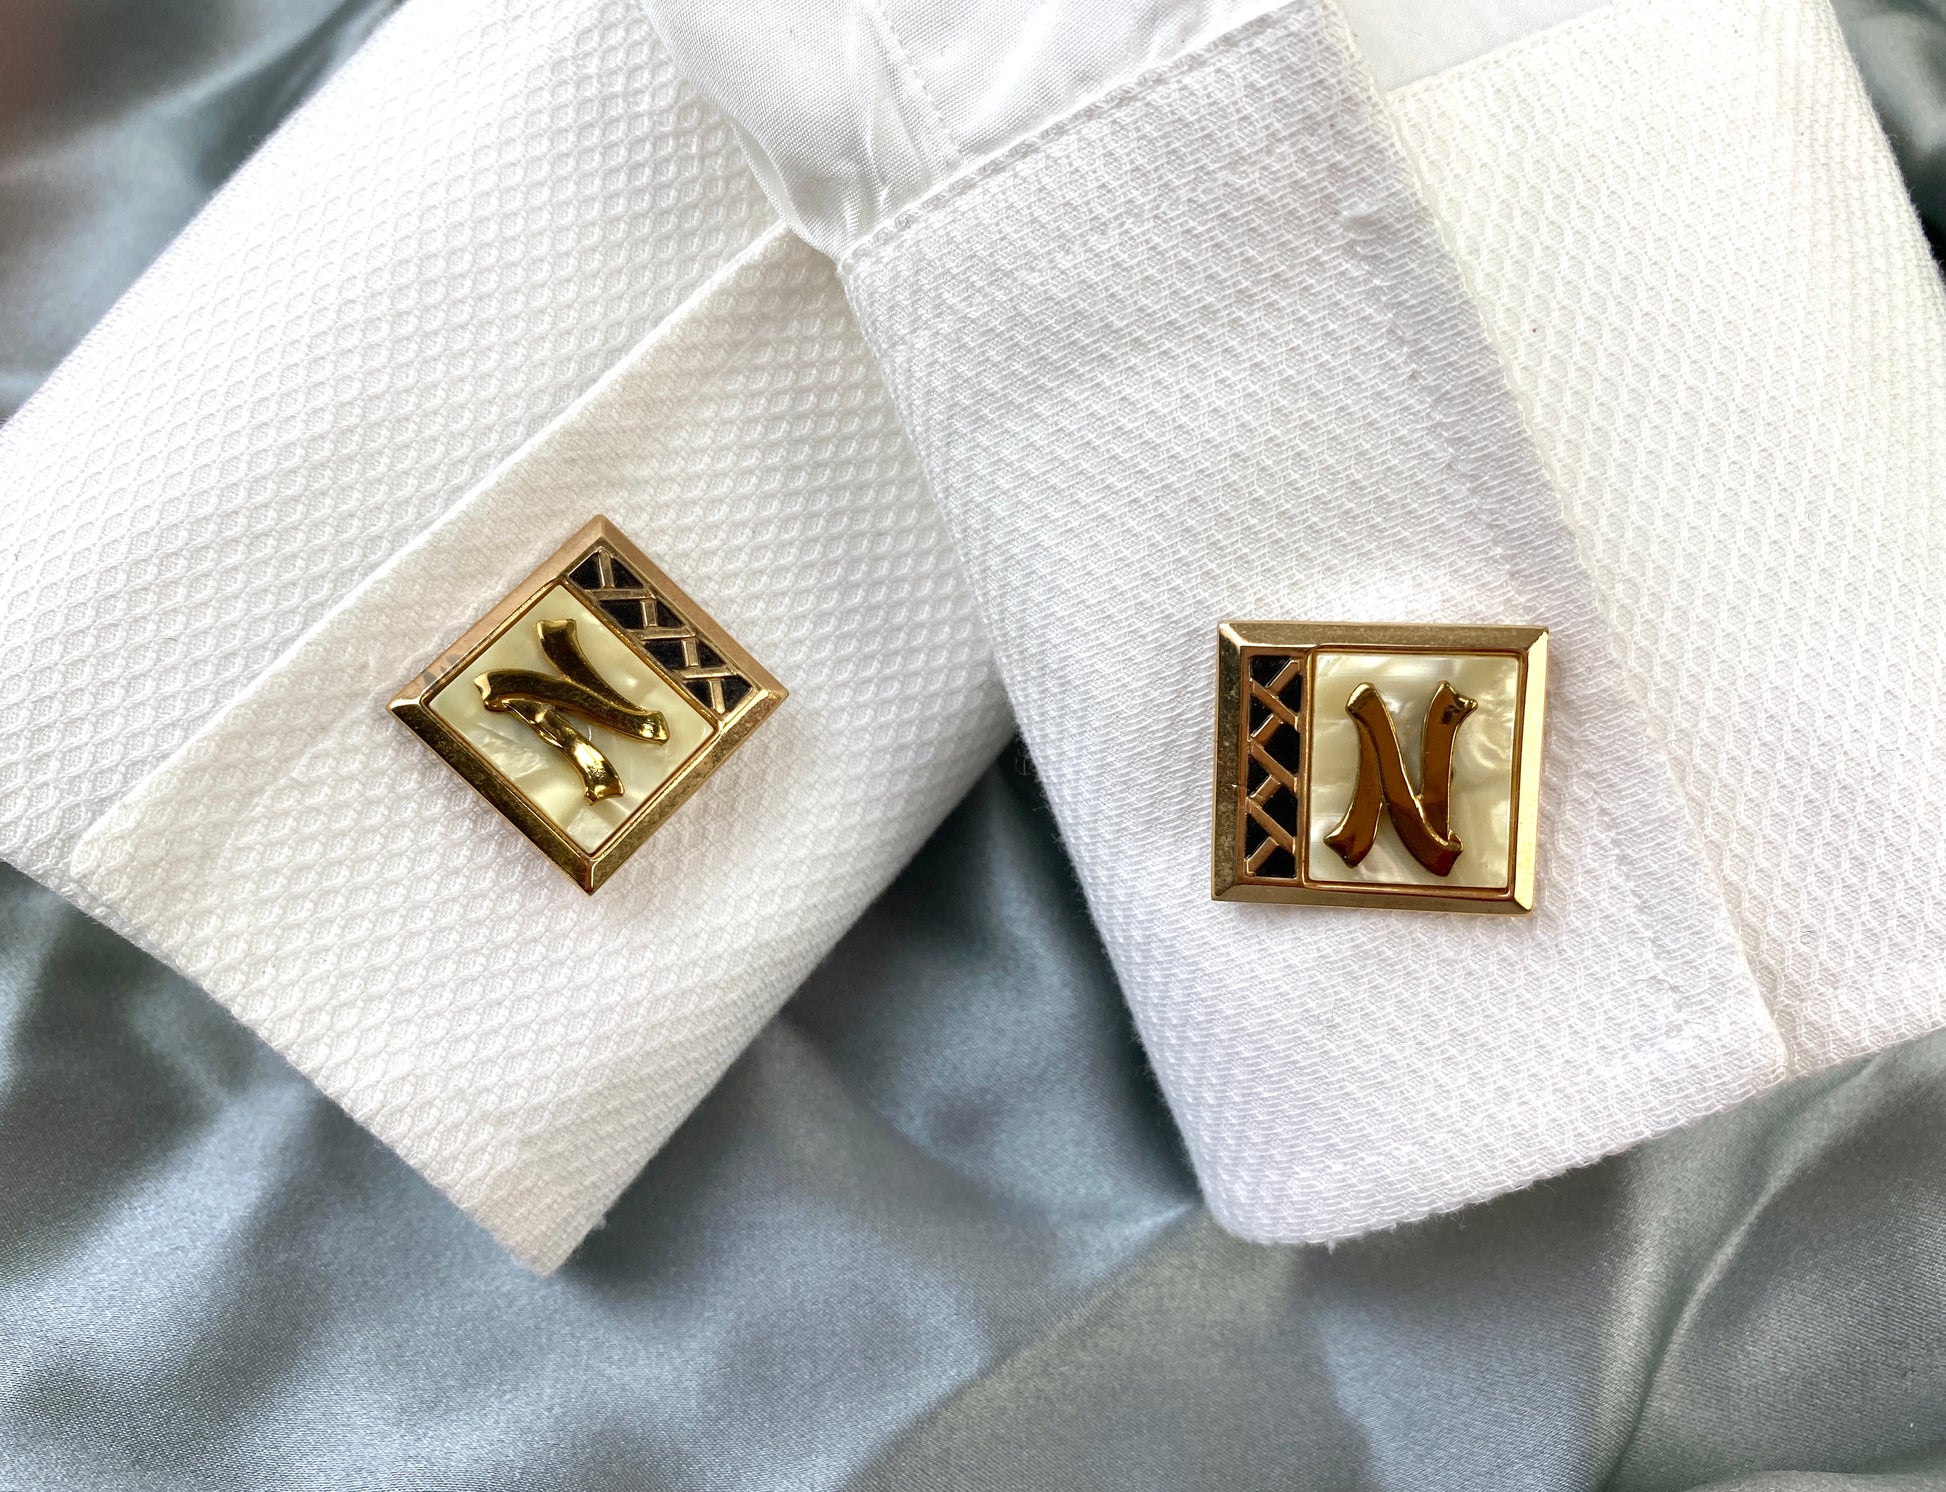 CHRISTIAN DIOR SQUARE GOLD TONE CUFFLINKS AND TIE CLASP SET